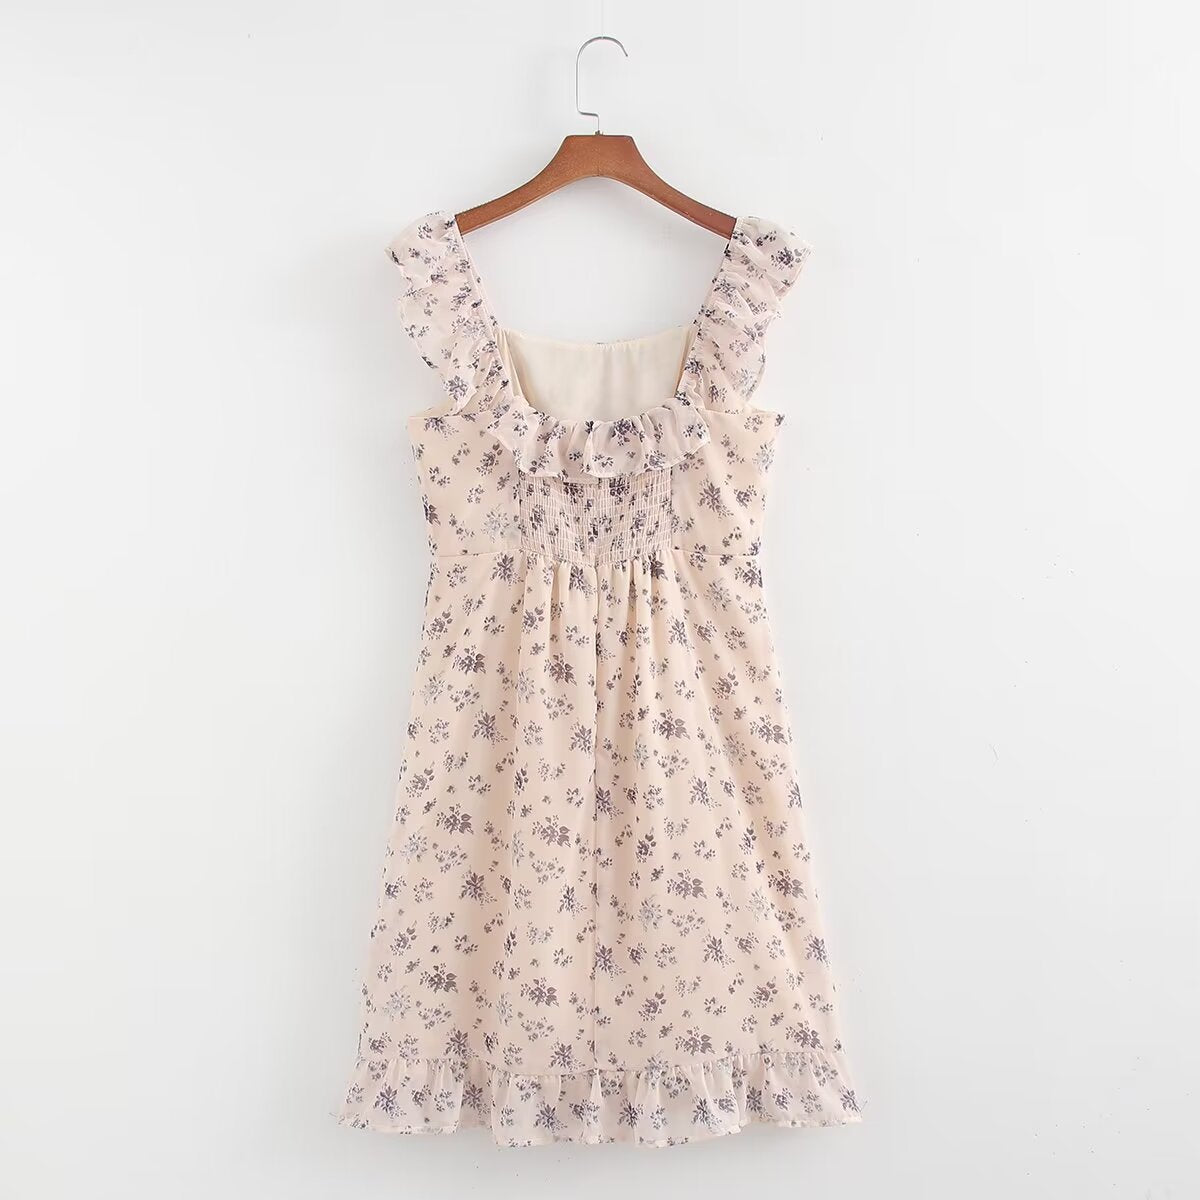 Autumn French Pastoral Girlish Fresh Lace Square Collar Floral Dress